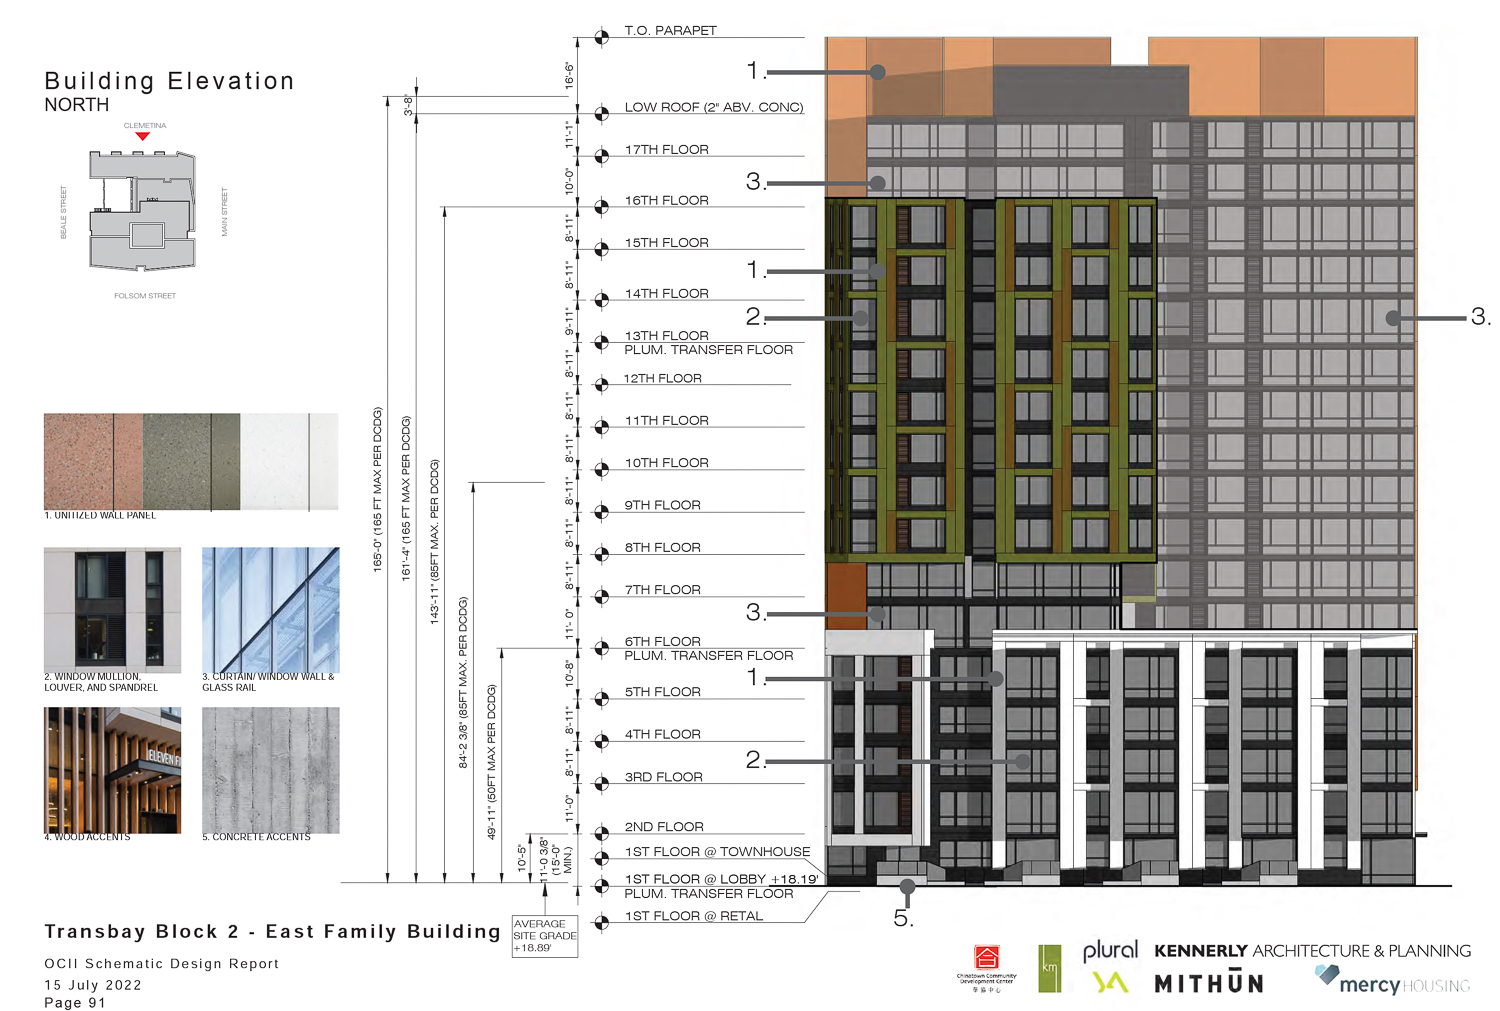 Transbay Block 2 East Family Building facade elevation, rendering by Kennerly Architecture & Planning